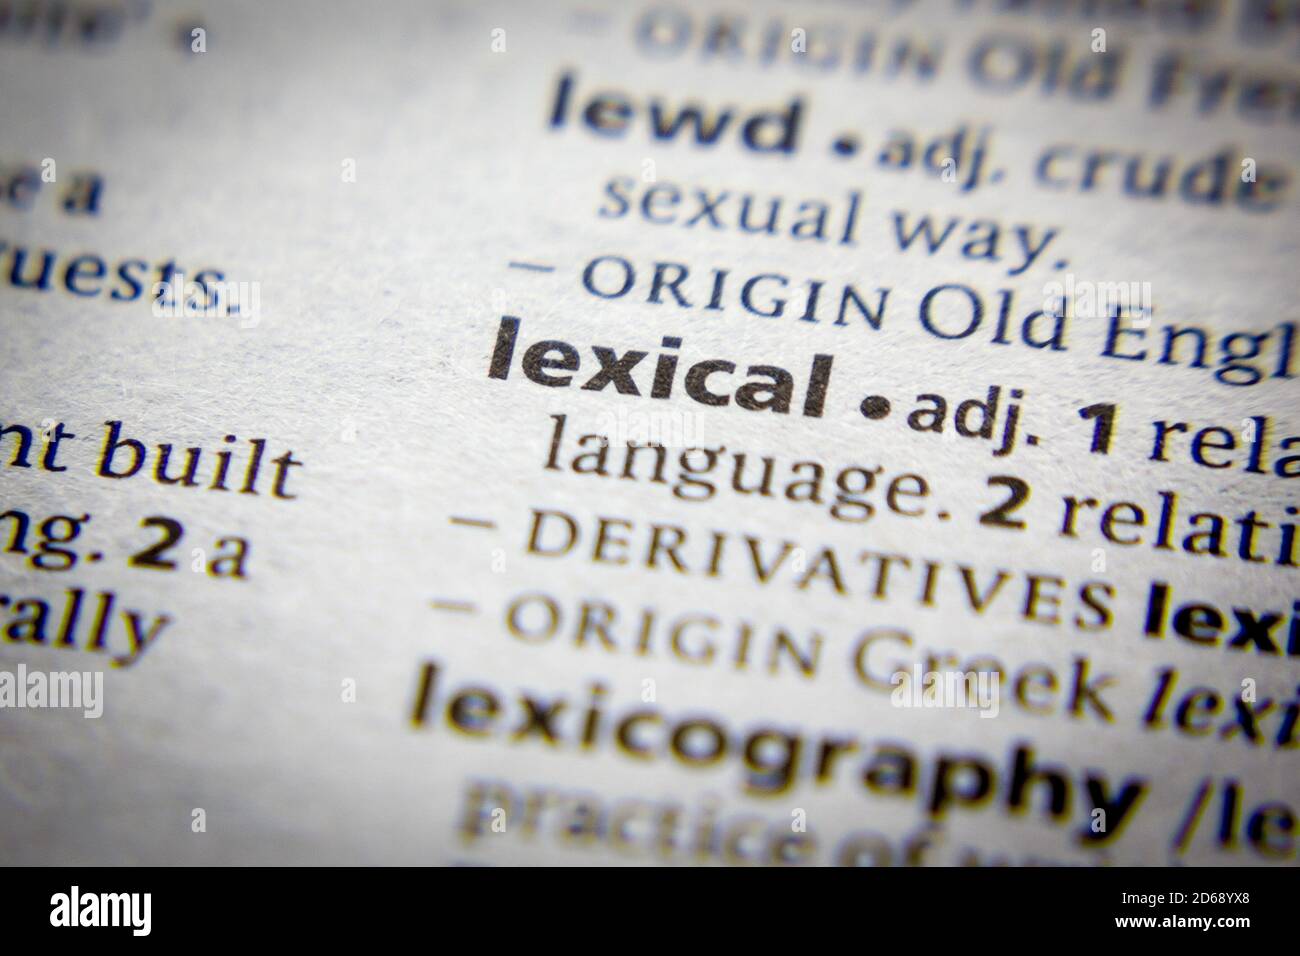 Word or phrase Lexical in a dictionary Stock Photo